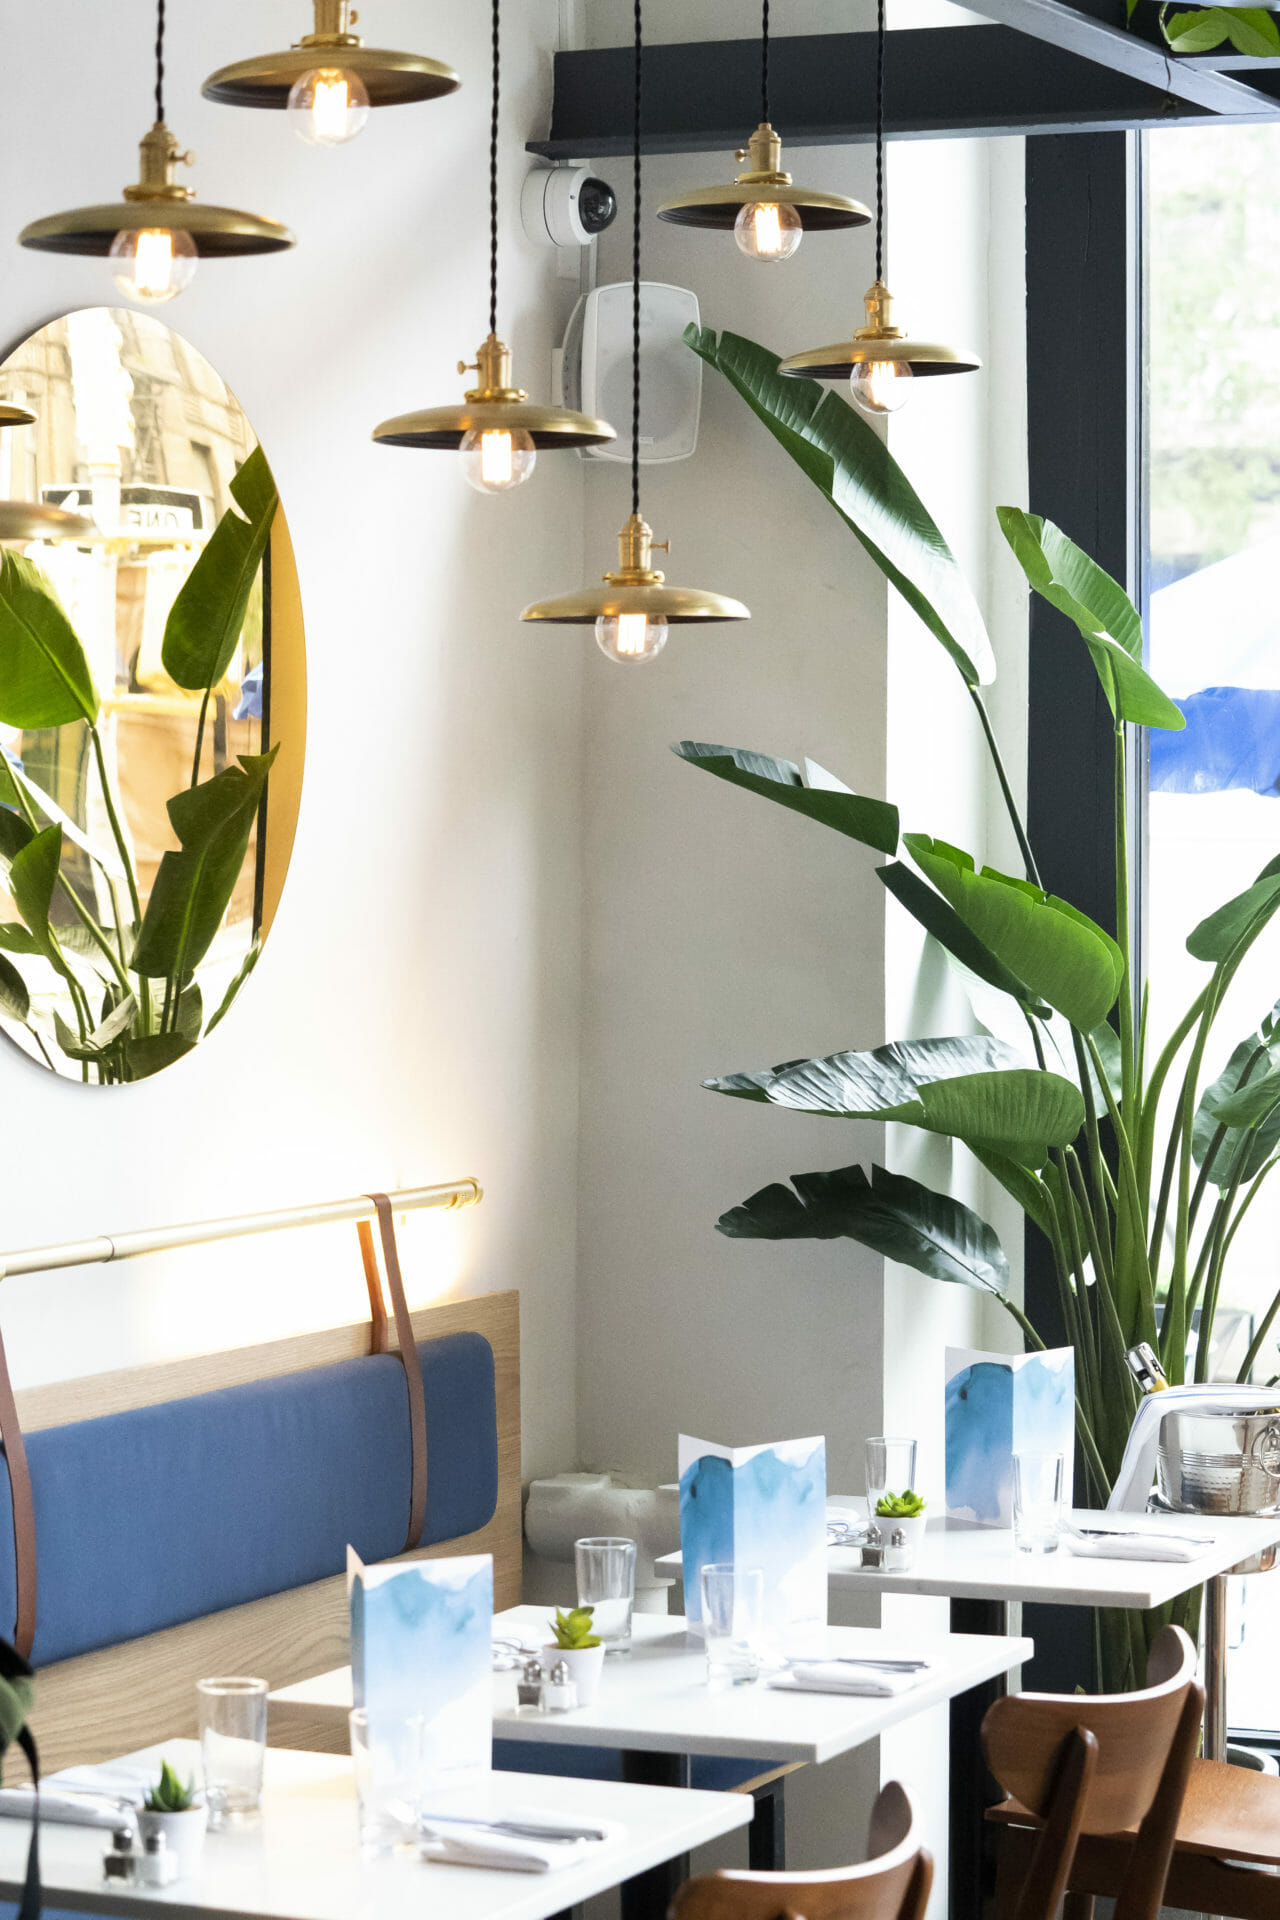 Interior of Upper West Side with a focus on the blue seating area, large green plants and gold hanging mirror.